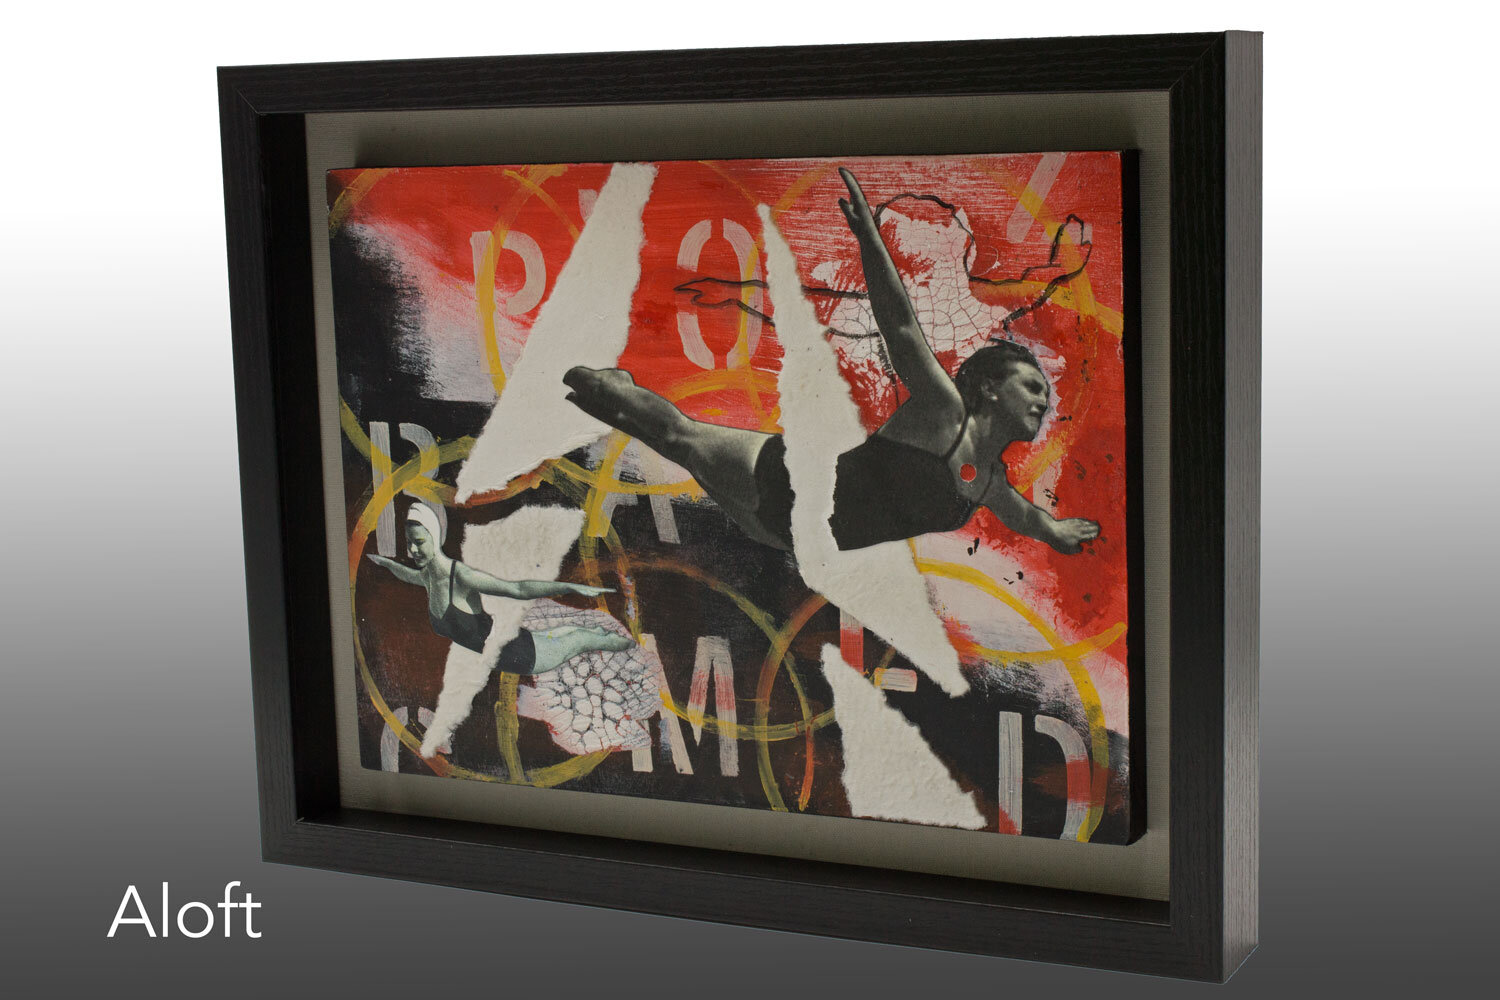 Aloft, mixed media collage with shadow box frame